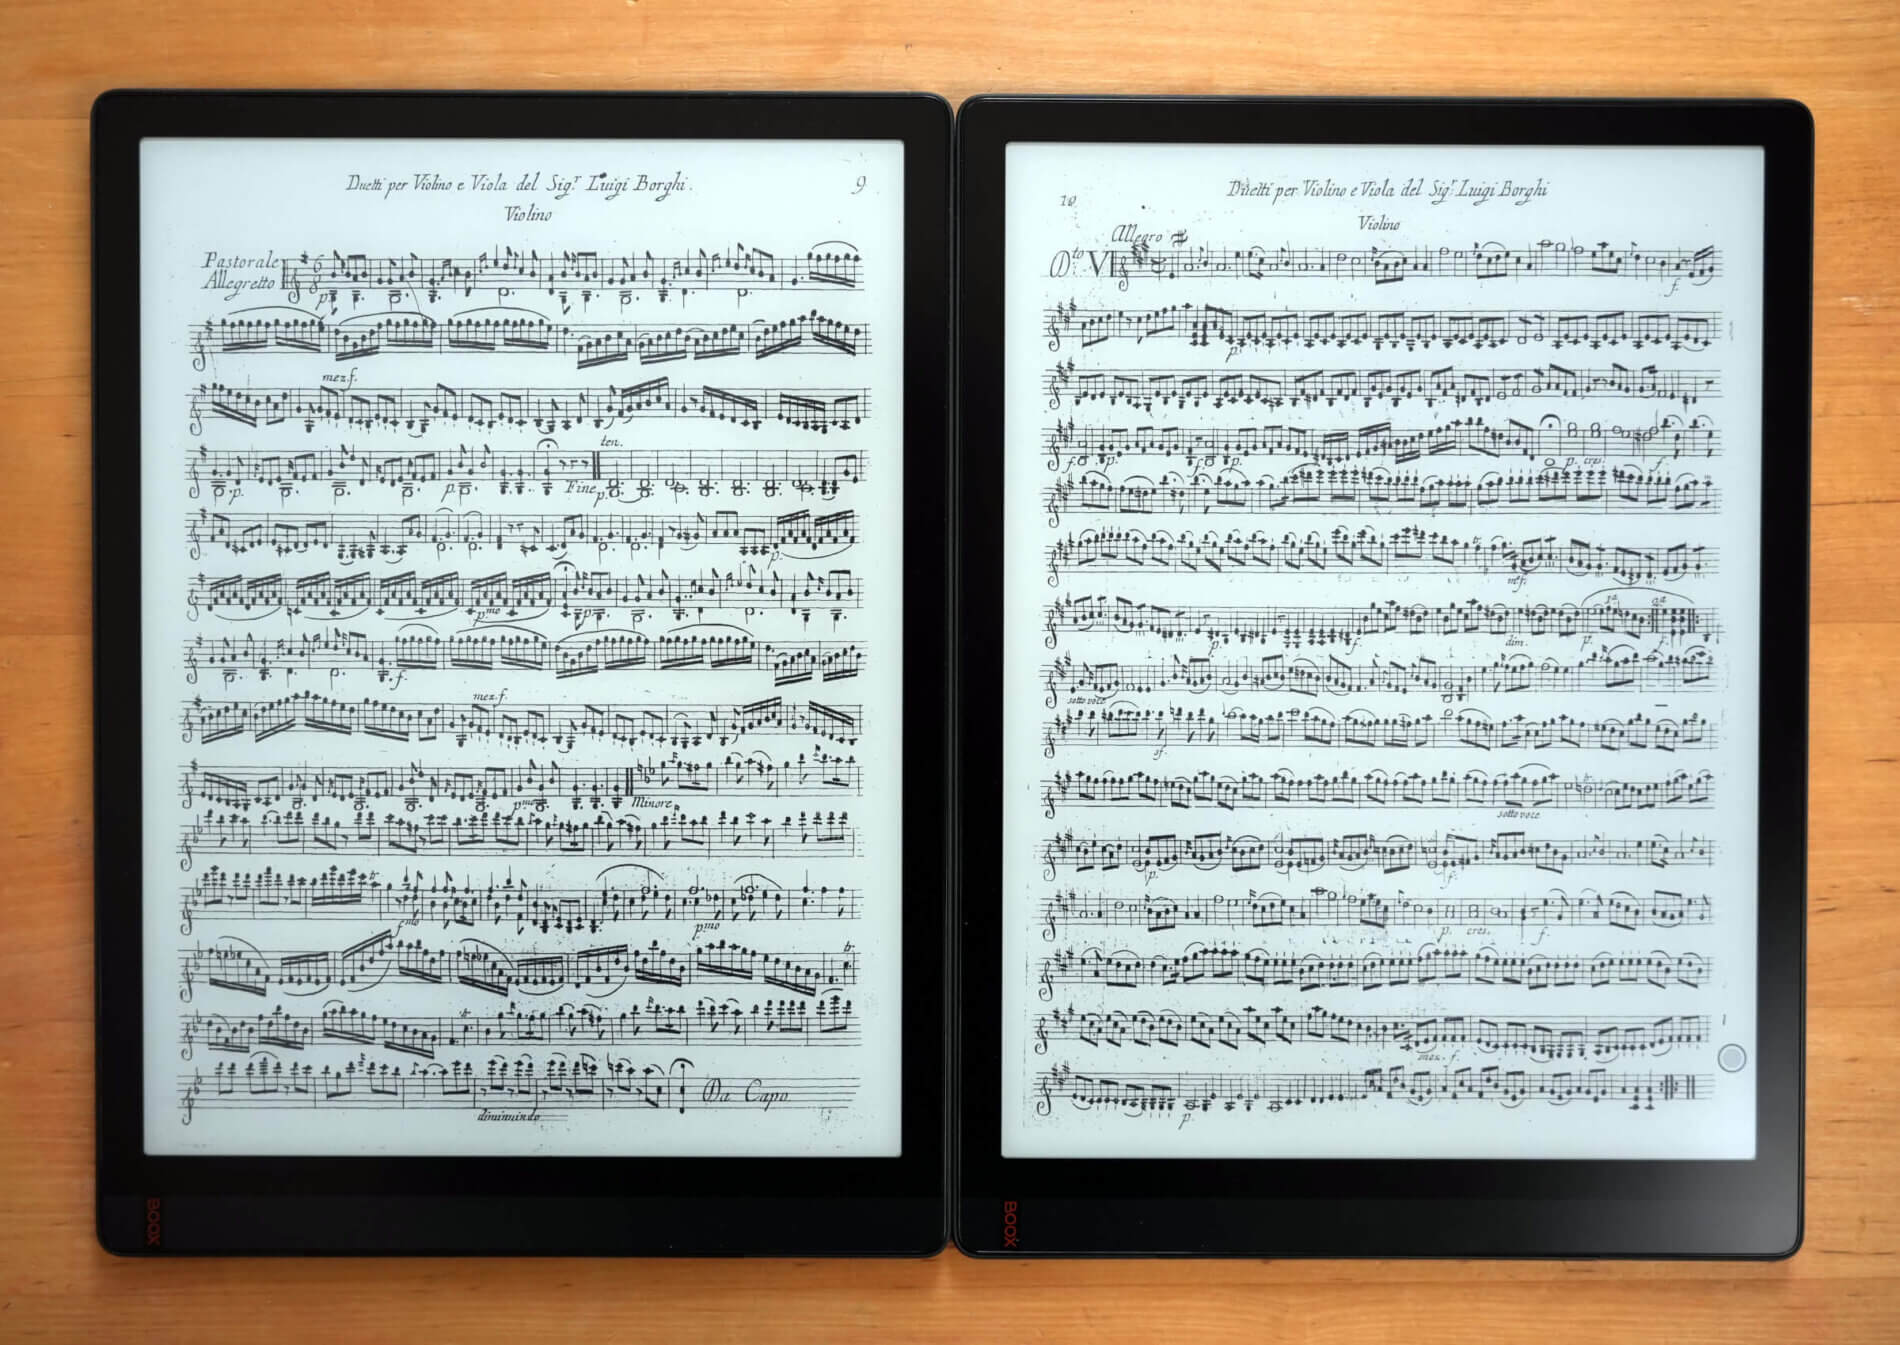 PadMu 4 and Onyx Boox Tab X in Dual Tablet mode, displaying two sheets of music side-by-side at the same time.